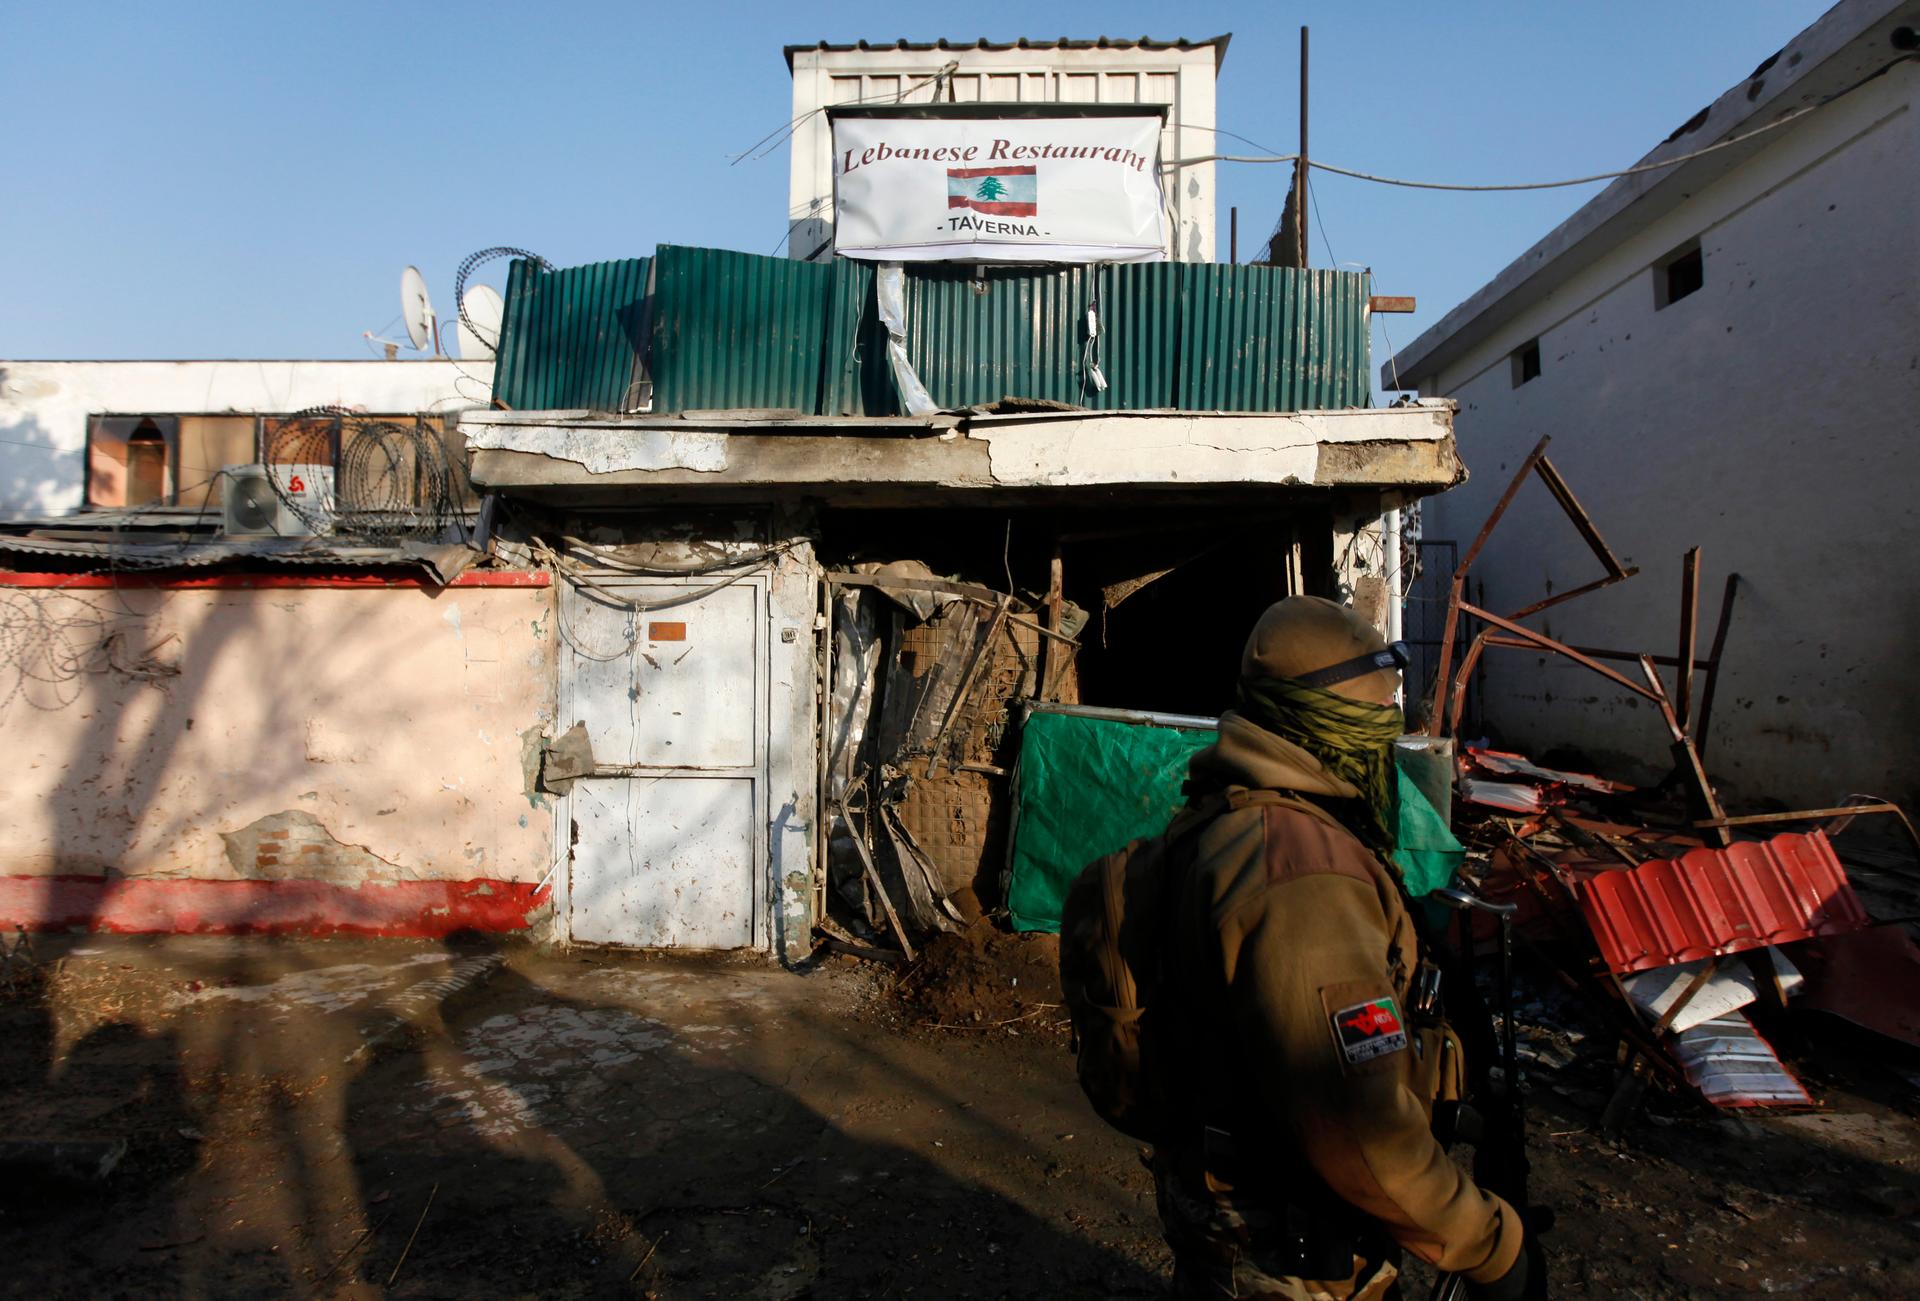 An Afghan security personnel walks past a Lebanese restaurant, the site of a suicide bombing, in Kabul January, 2014.